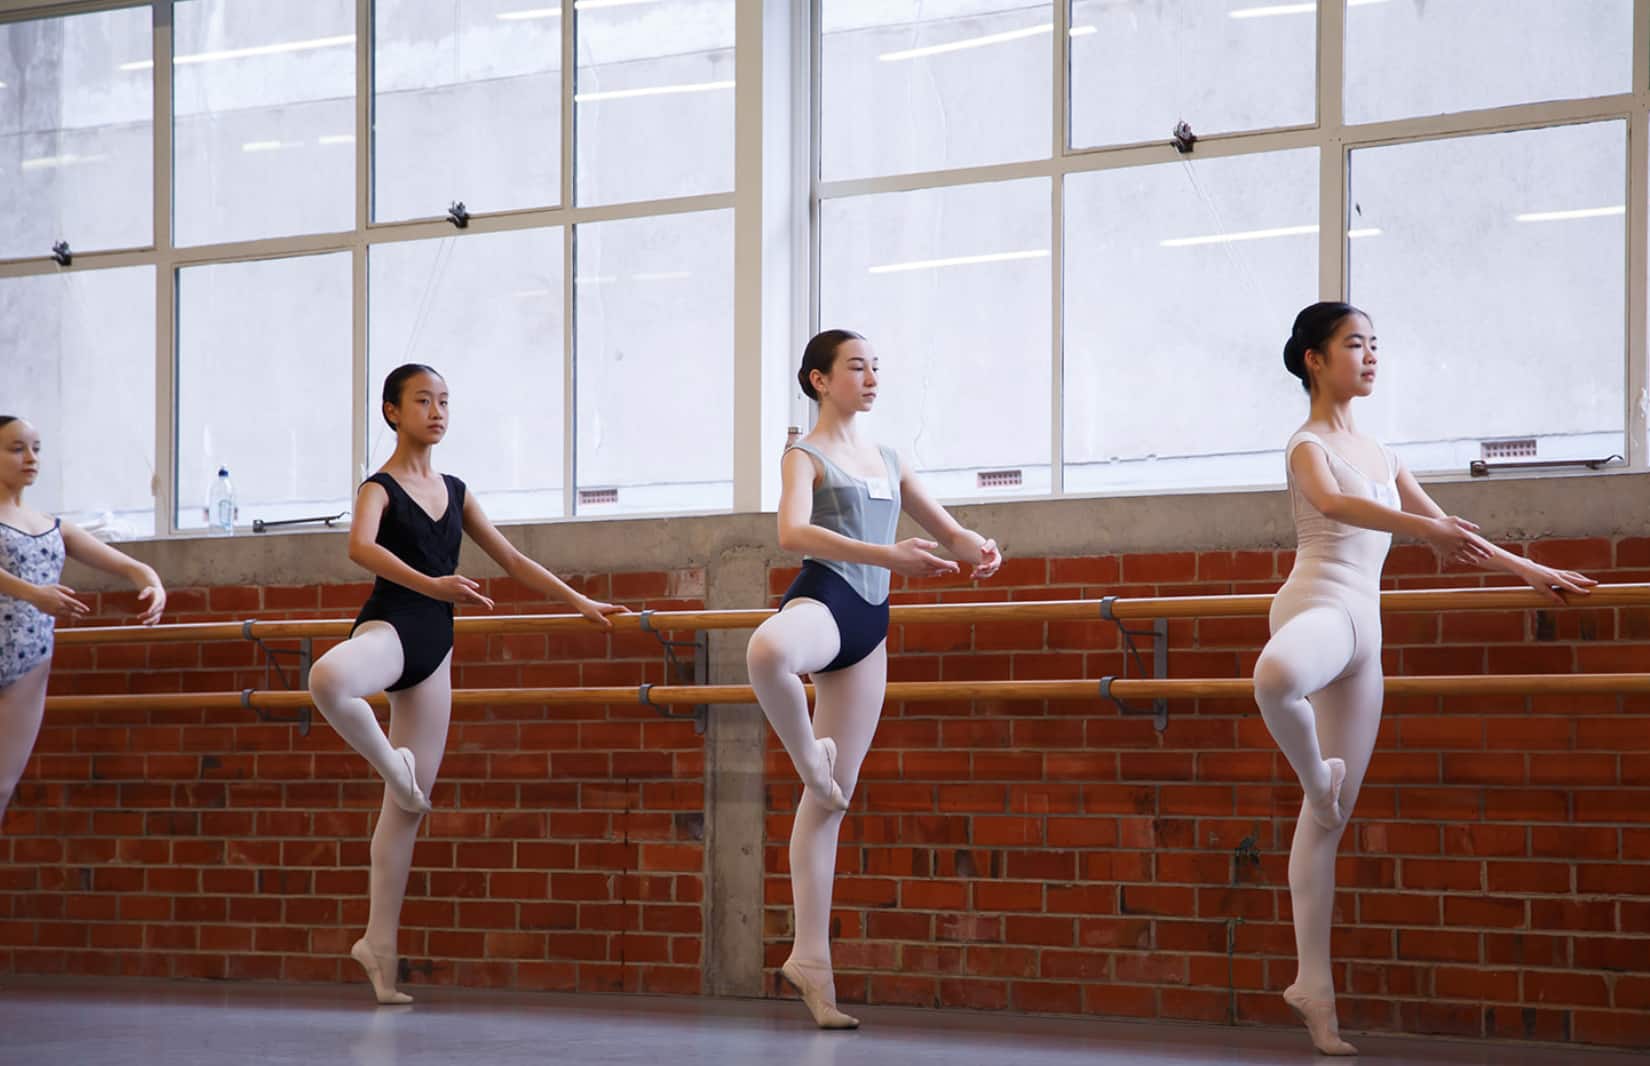 Pirouettes: How to Achieve a Clean Single